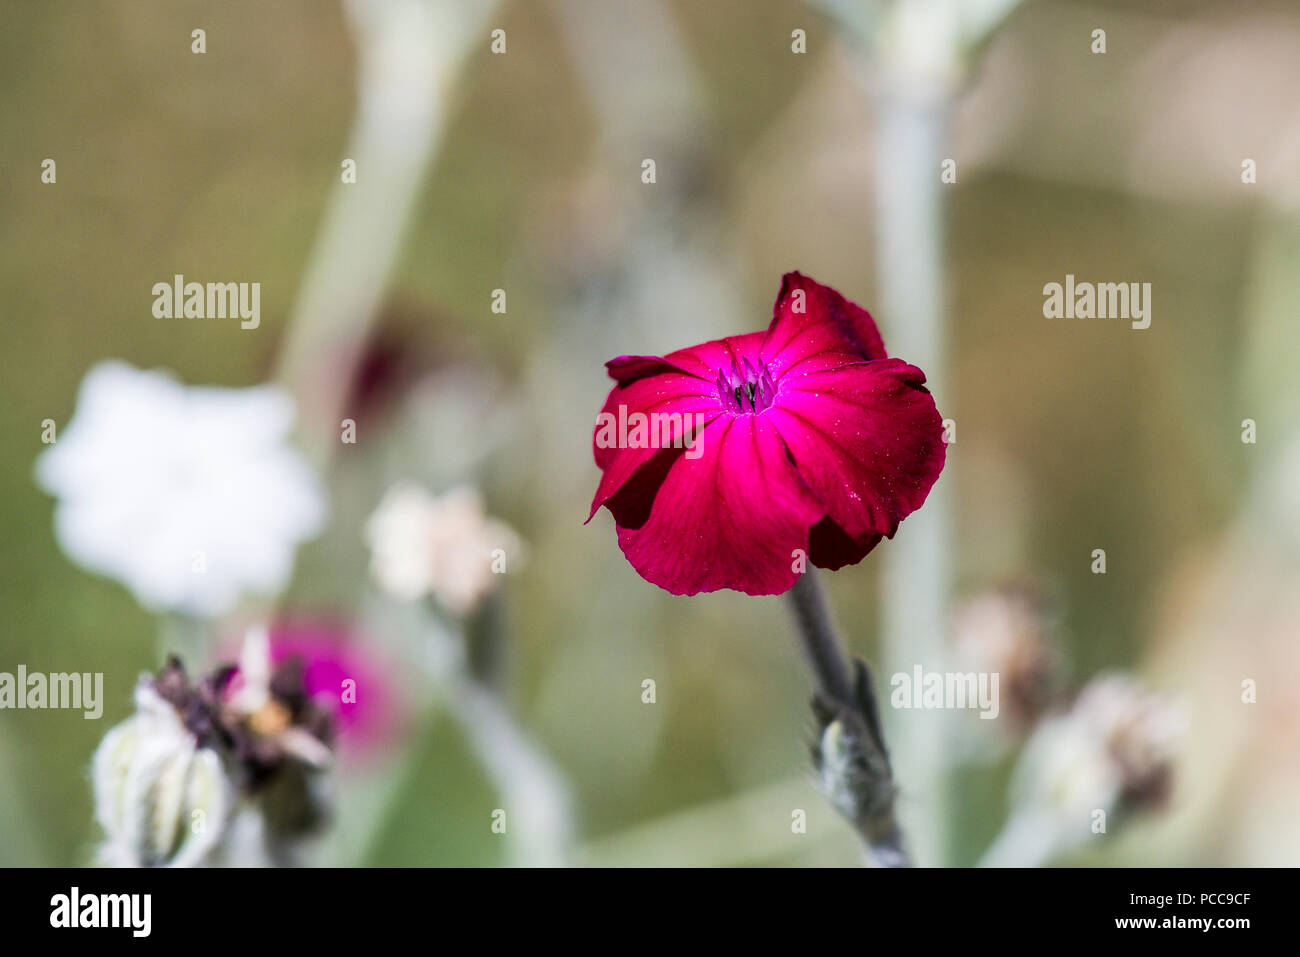 A close up of a rose campion (Lychnis coronaria) flower Stock Photo